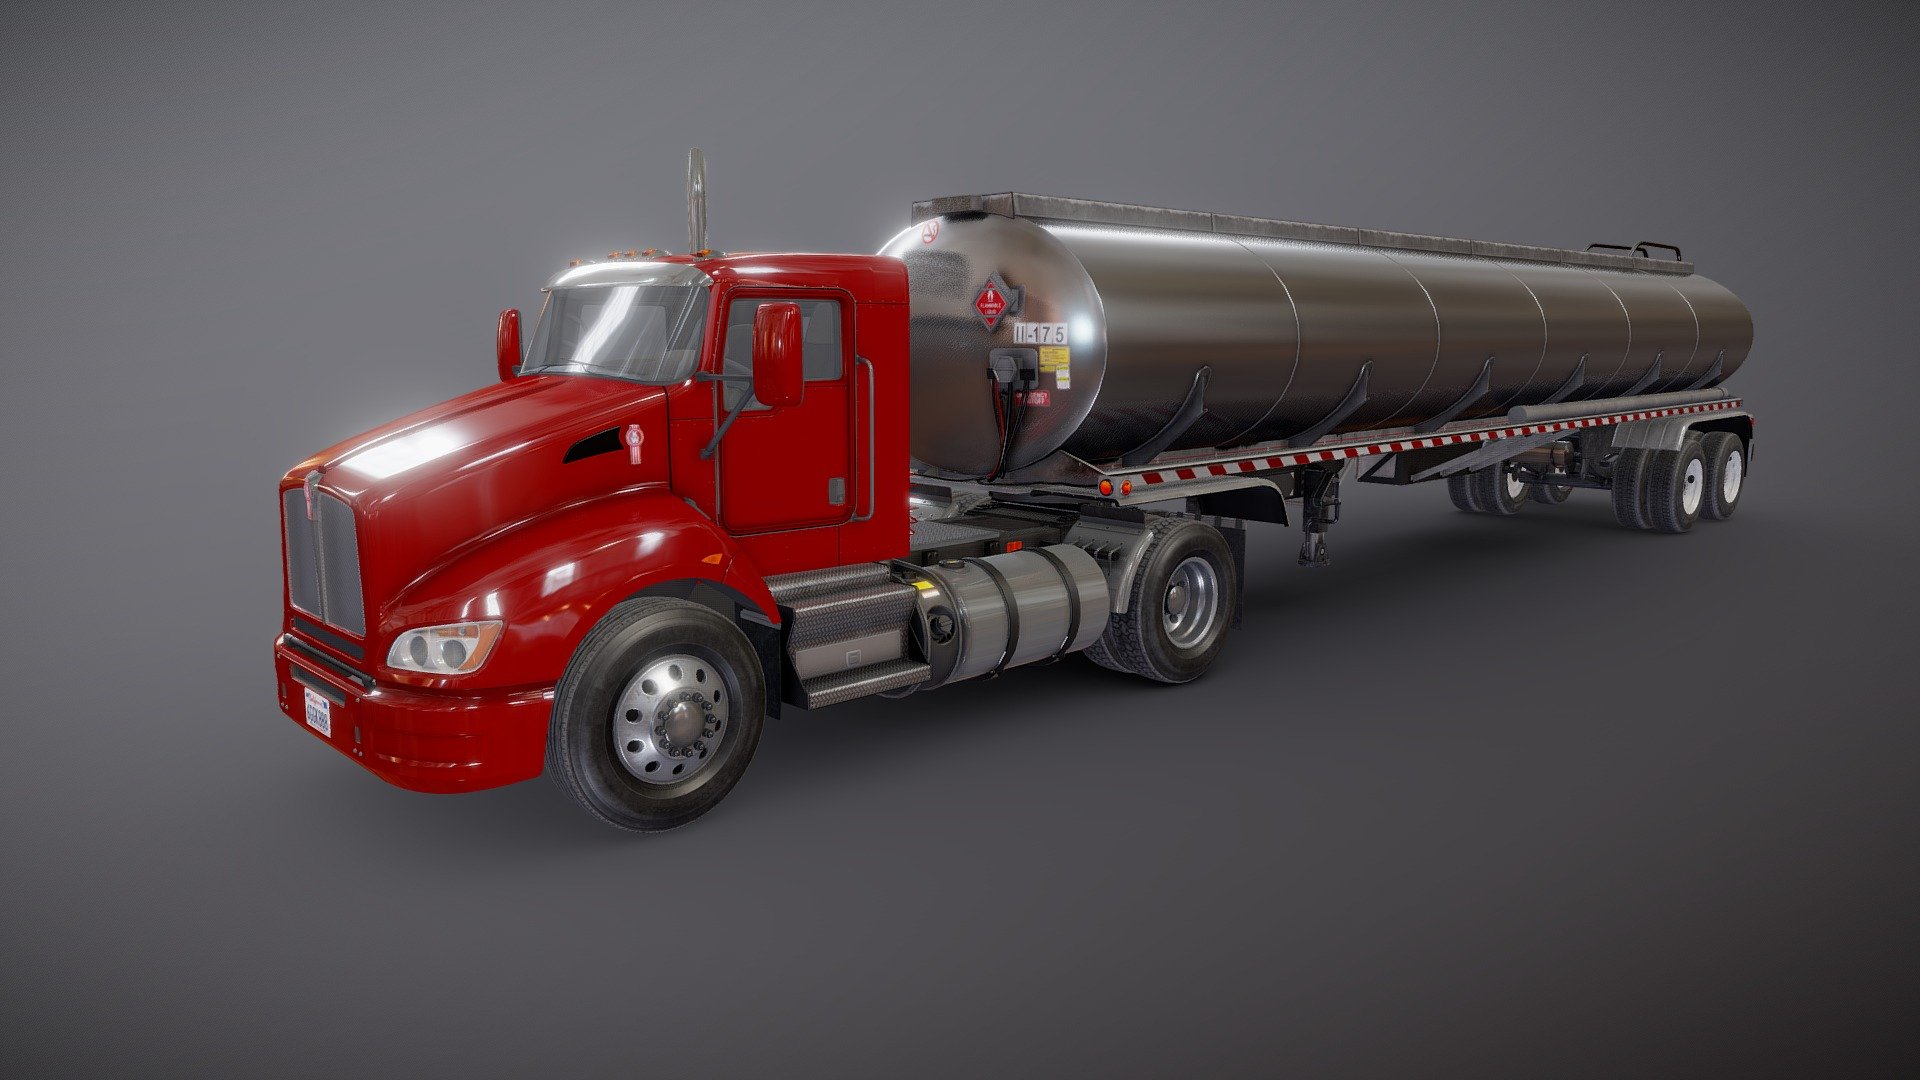 Kenworth T370 fuel tank game ready model.

Full textured model with clean topology.

High accuracy exterior model

Different tires for rear and front wheels.

Different wheels for rig and van trailer.

High detailed cabin - seams, rivets, chrome parts, wipers and etc.

High detailed rims and tires, with PBR maps(Base_Color/Metallic/Normal/Roughness.png2048x2048 )

Original scale.

Truck size

Lenght 6.73m , width 3.38m , height 3.96m.

Full size

Lenght 19.7m , width 3.38m , height 3.96m.

Model ready for real-time apps, games, virtual reality and augmented reality.

Asset looks accuracy and realistic and become a good part of your project 3d model